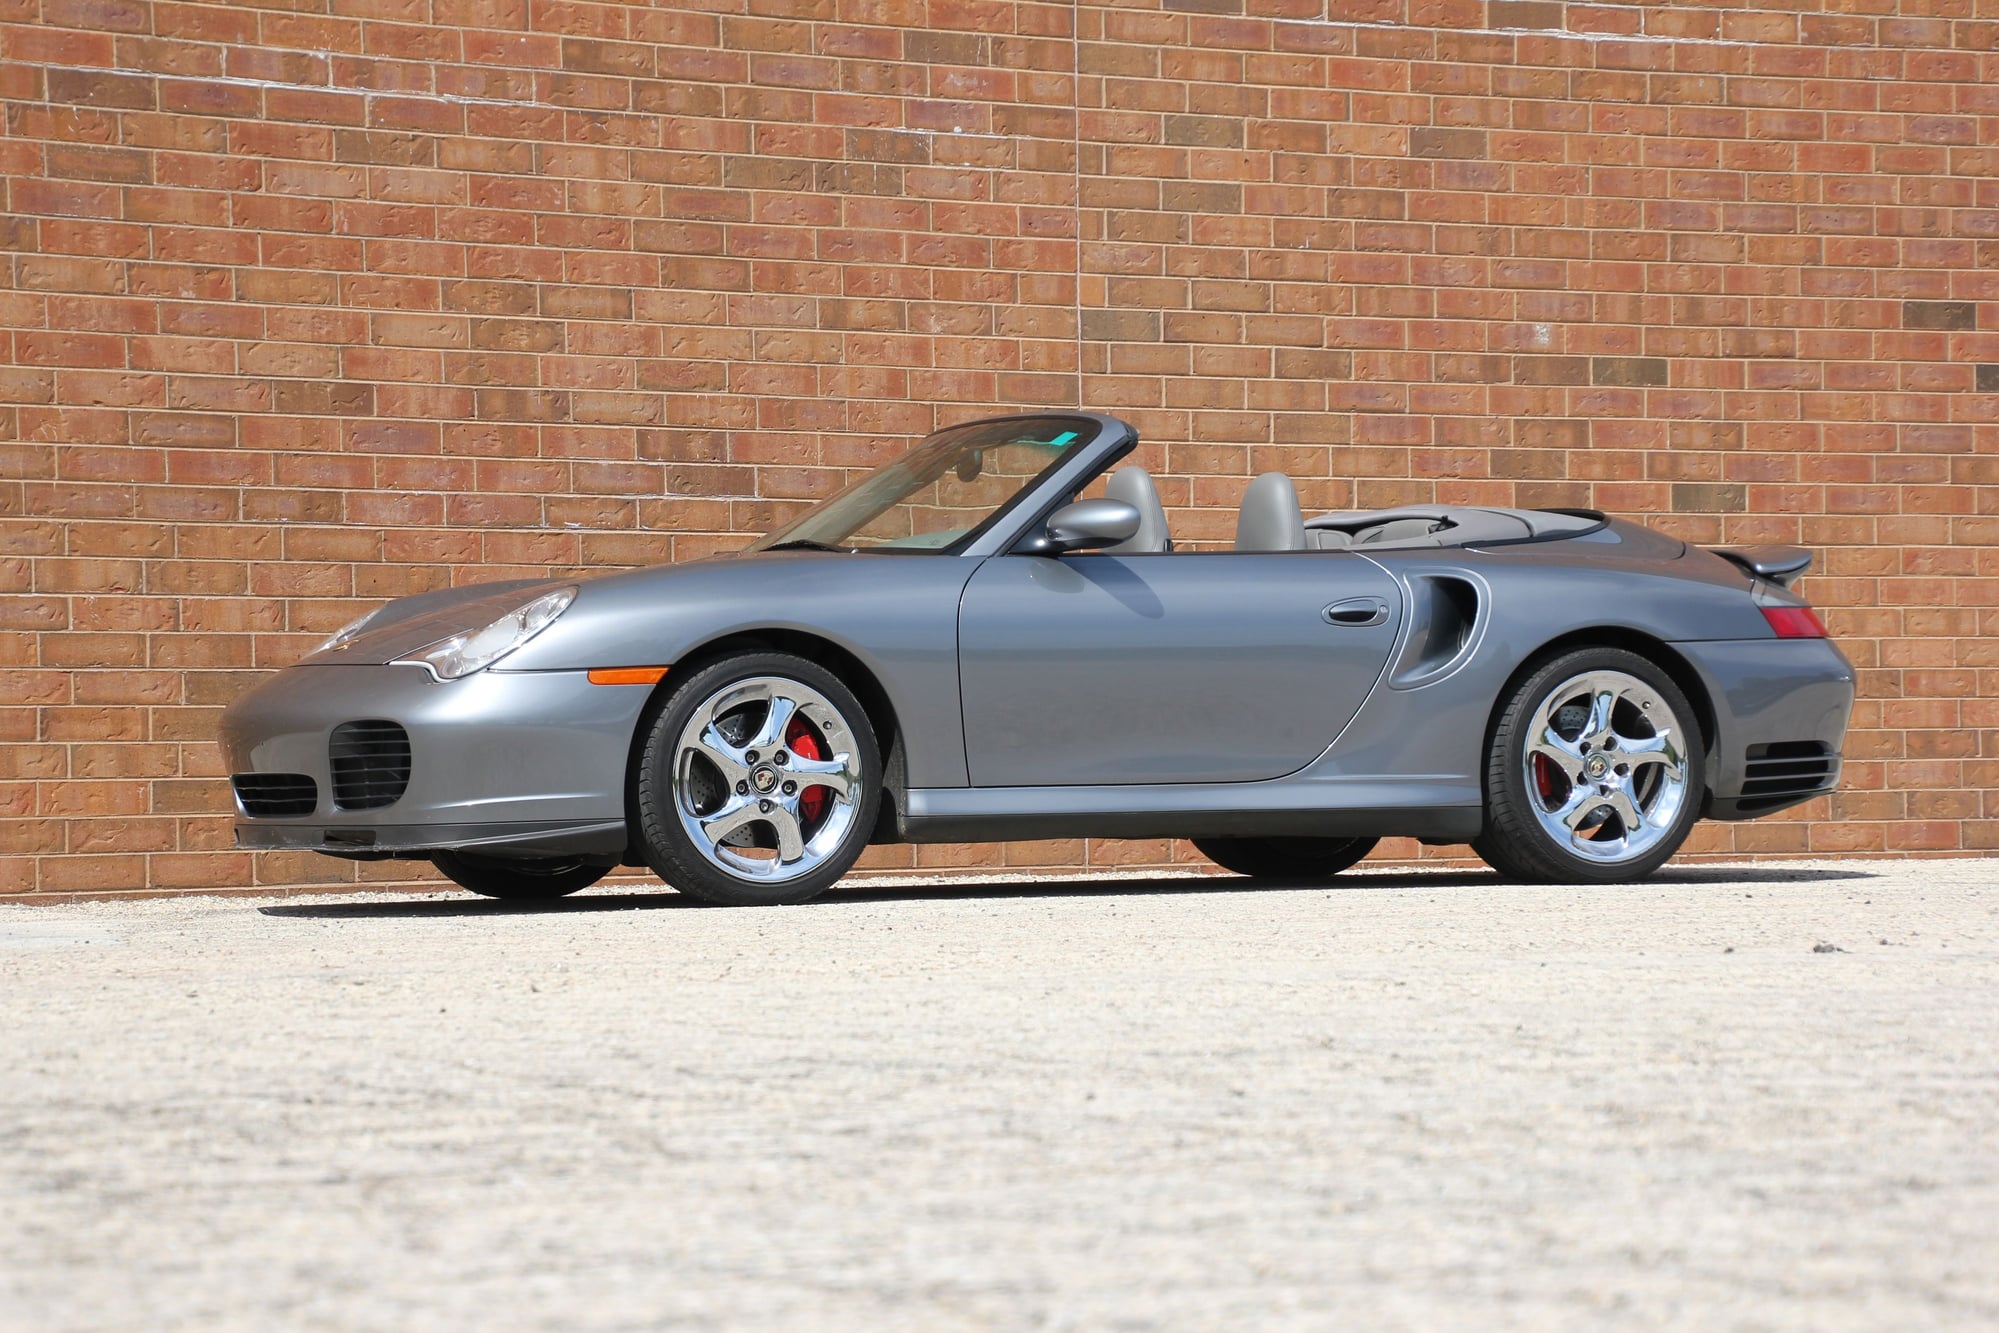 2004 Porsche 911 - 2004 Porsche 911 Turbo Cabriolet X50!  6-Speed Manual Transaxle!  This is the one!! - Used - VIN WP0CB29904S675555 - 64,274 Miles - 6 cyl - 4WD - Manual - Convertible - Gray - Waterford, WI 53185, United States